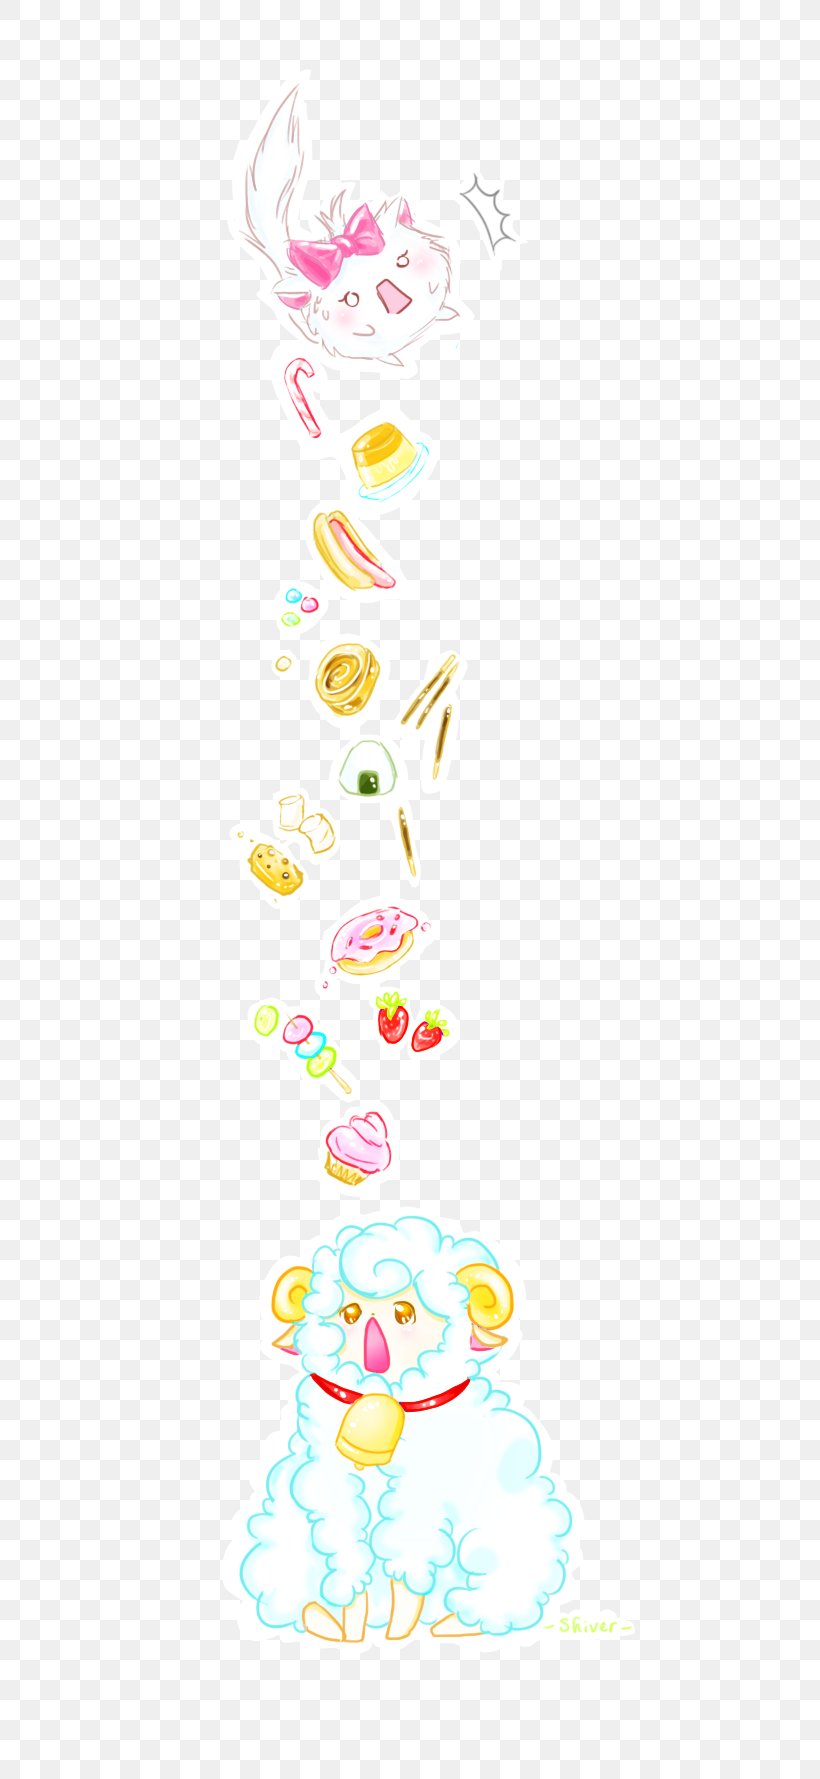 Line Clip Art, PNG, 700x1779px, Pink, Petal, Yellow Download Free